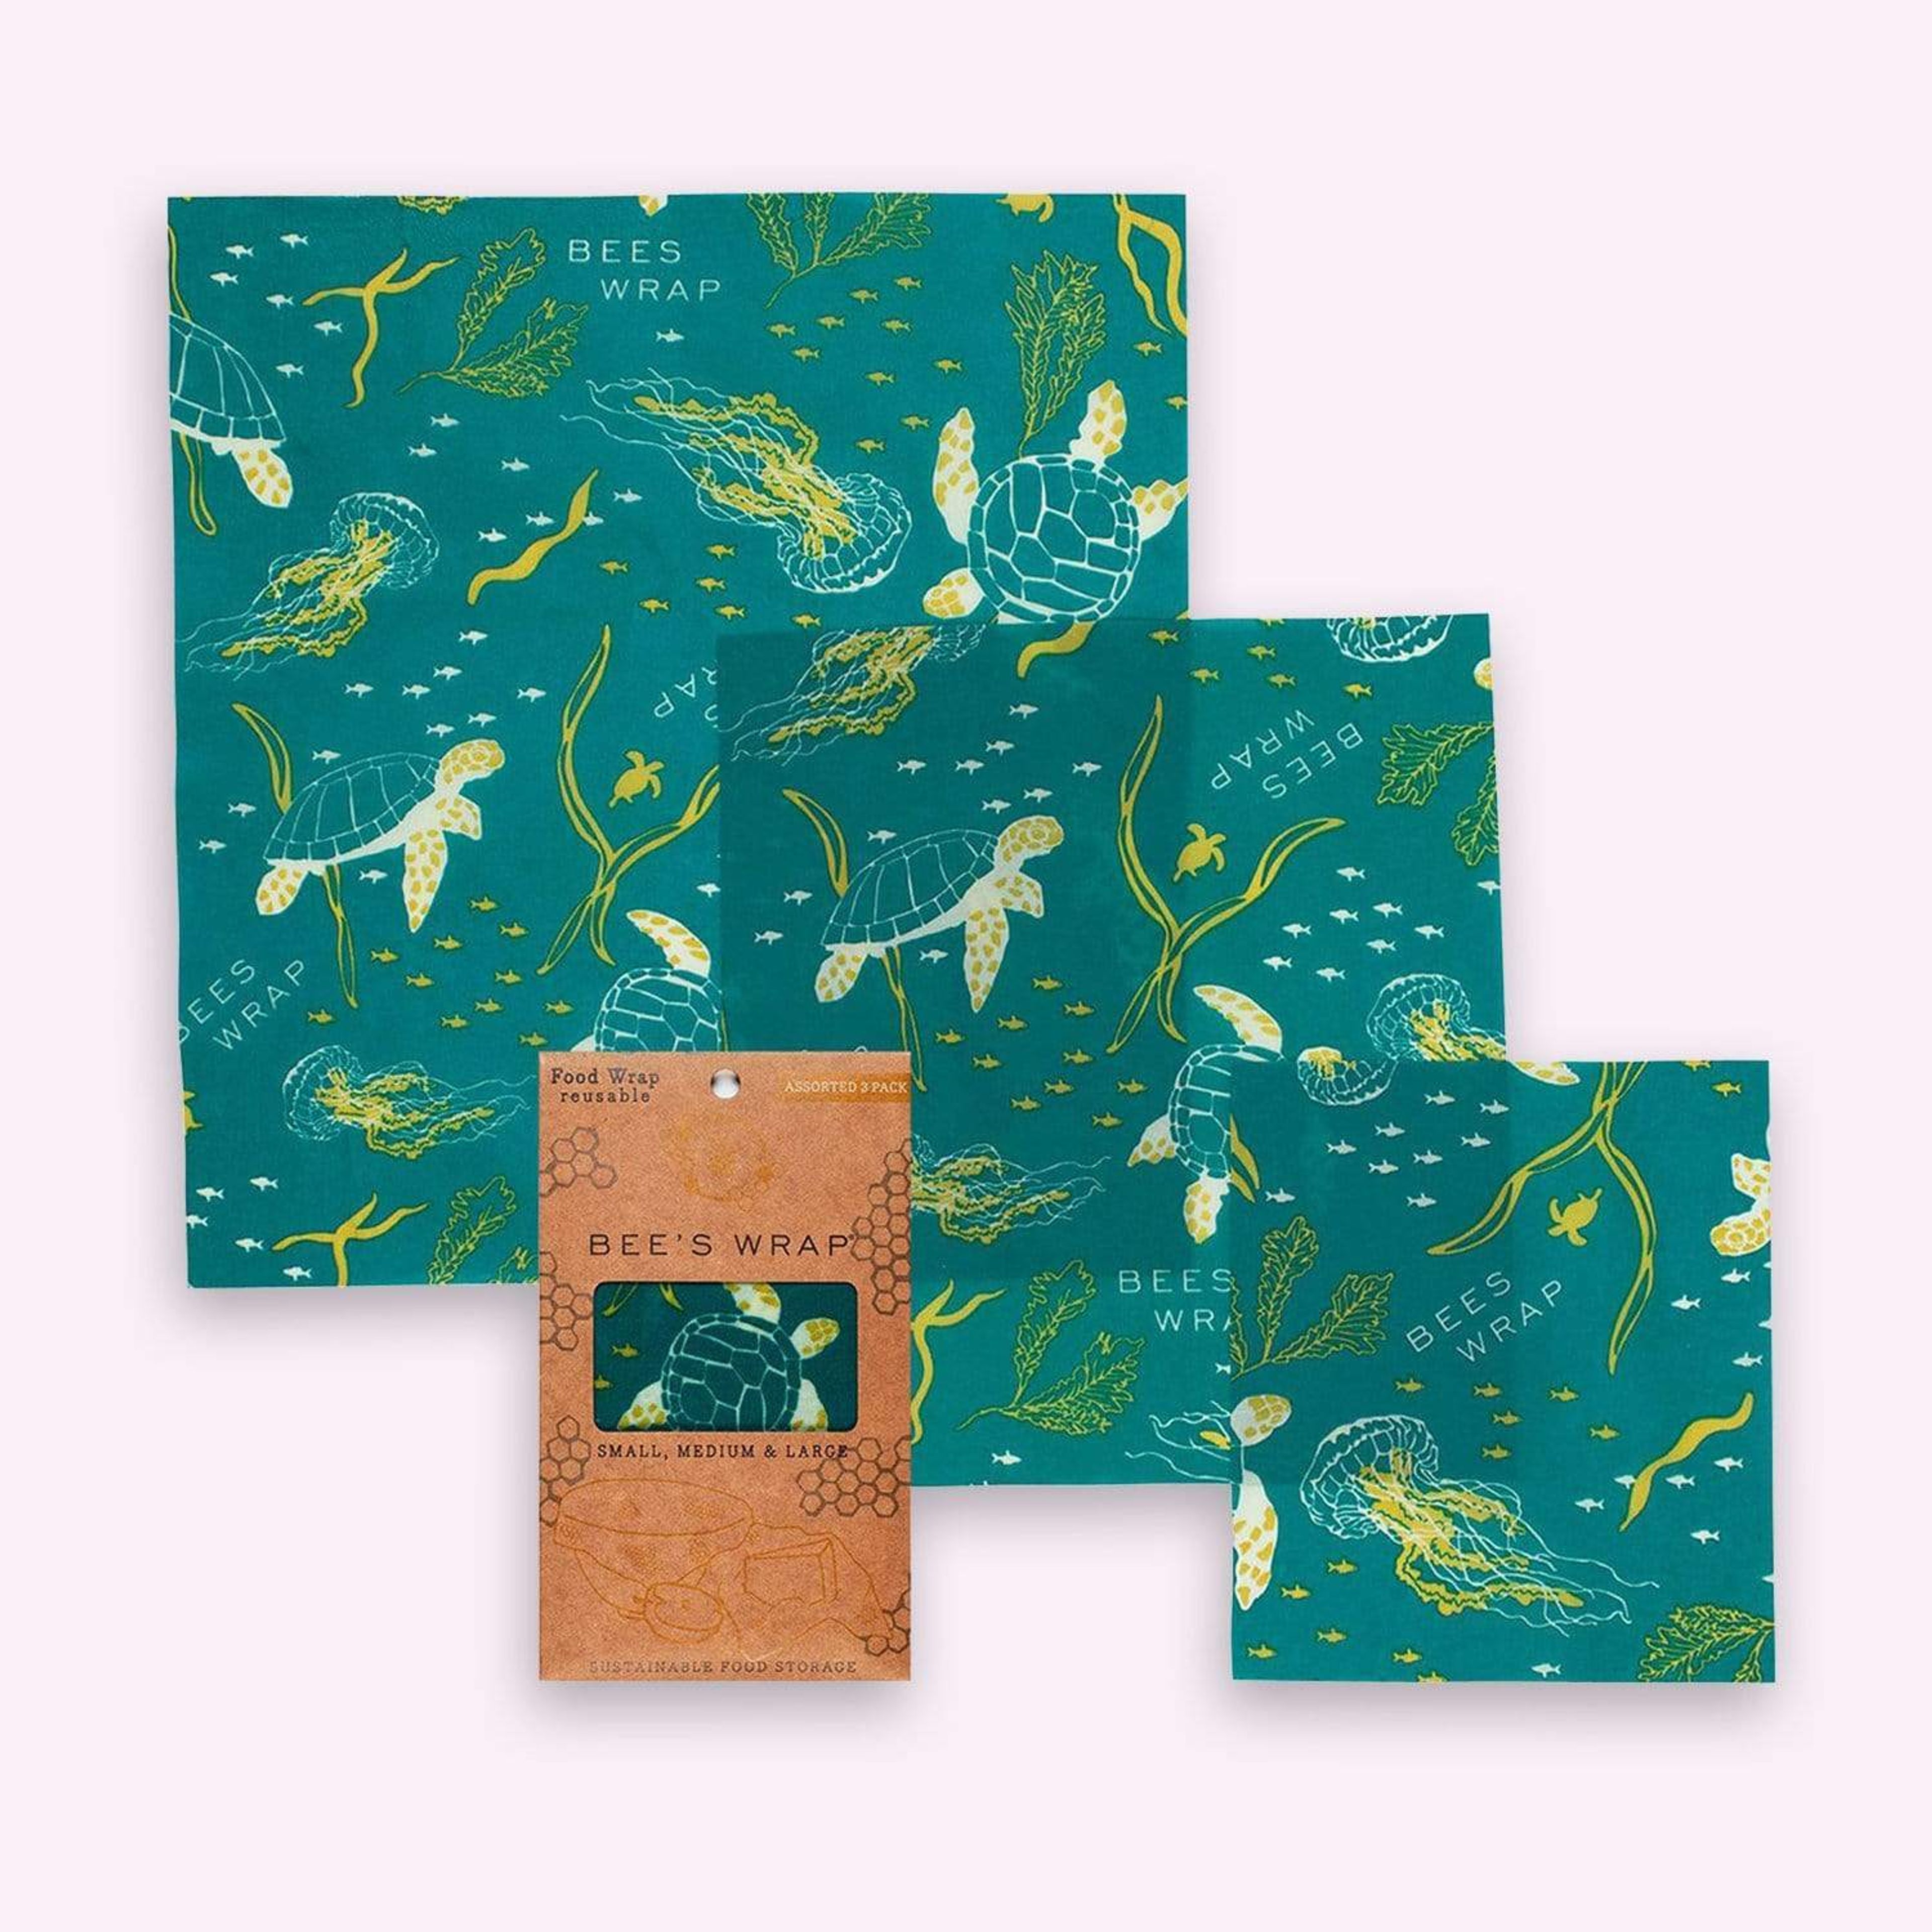 Beeswax Food Wraps - Variety Packs - Zero Waste Food Wraps, Organic, 3 Pack, Beeswax or Vegan